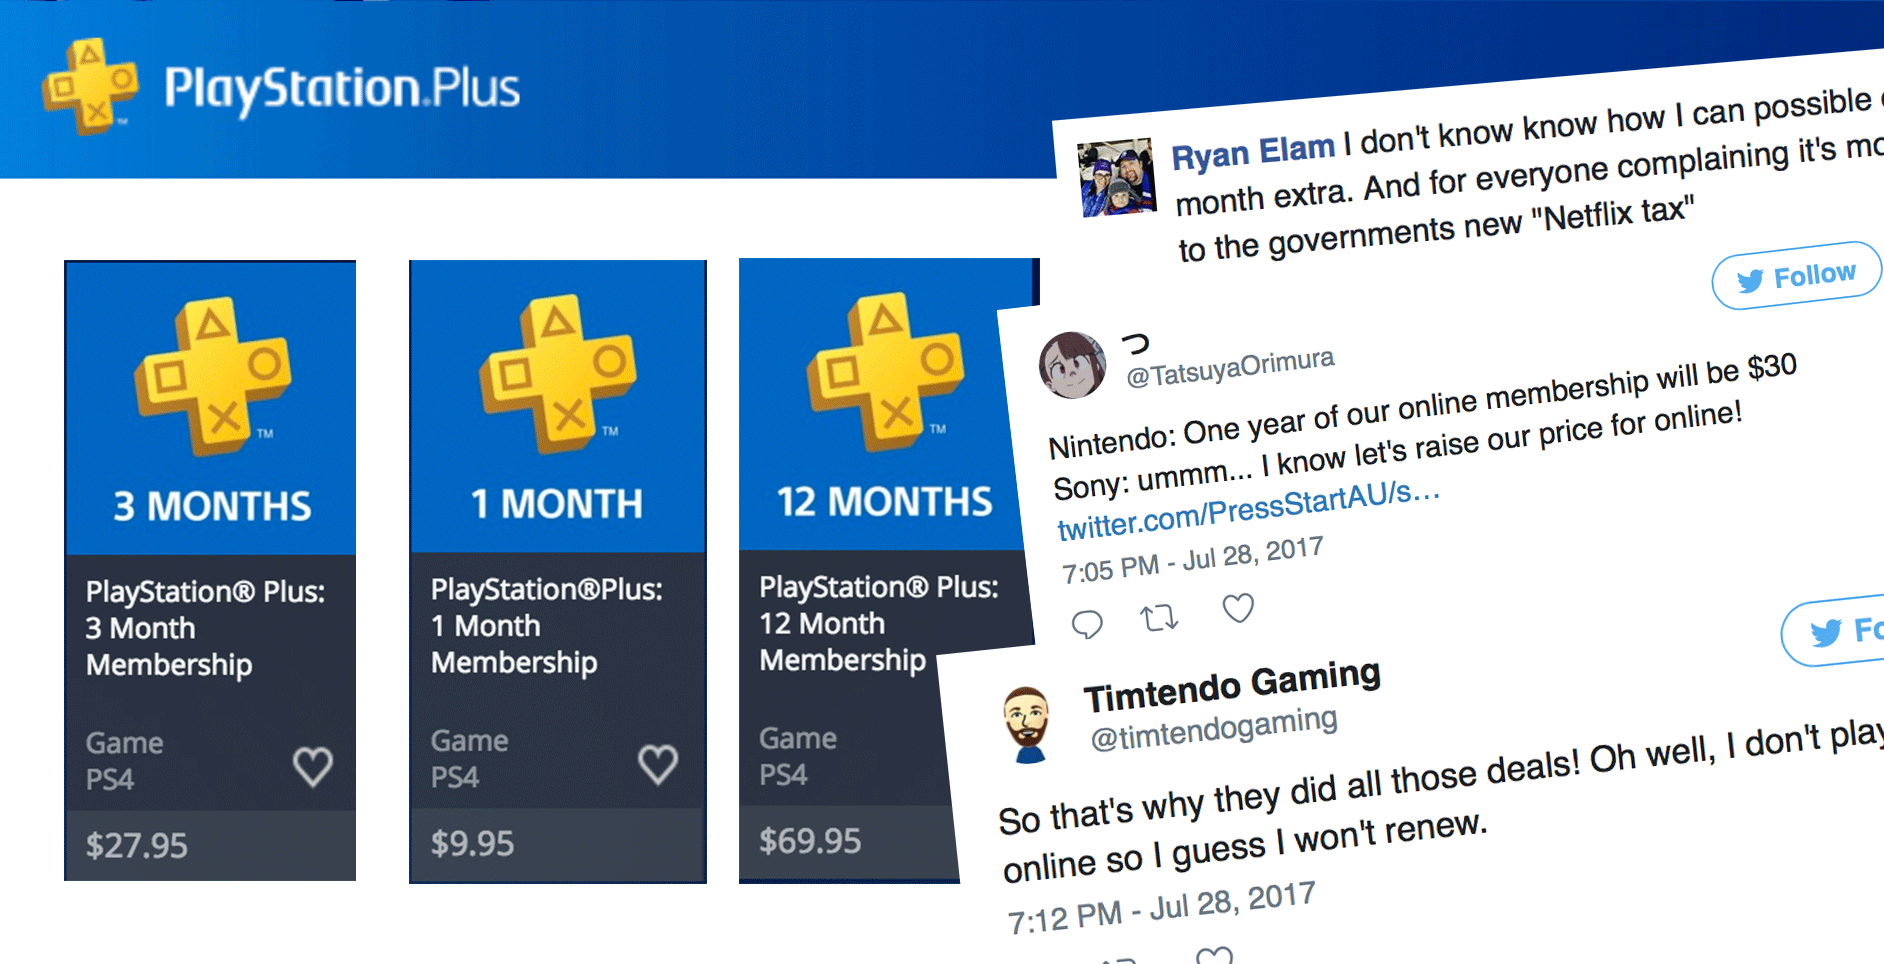 Et hundrede år plantageejer Lår The Reactions To The PlayStation Plus Price Hike Are Mixed